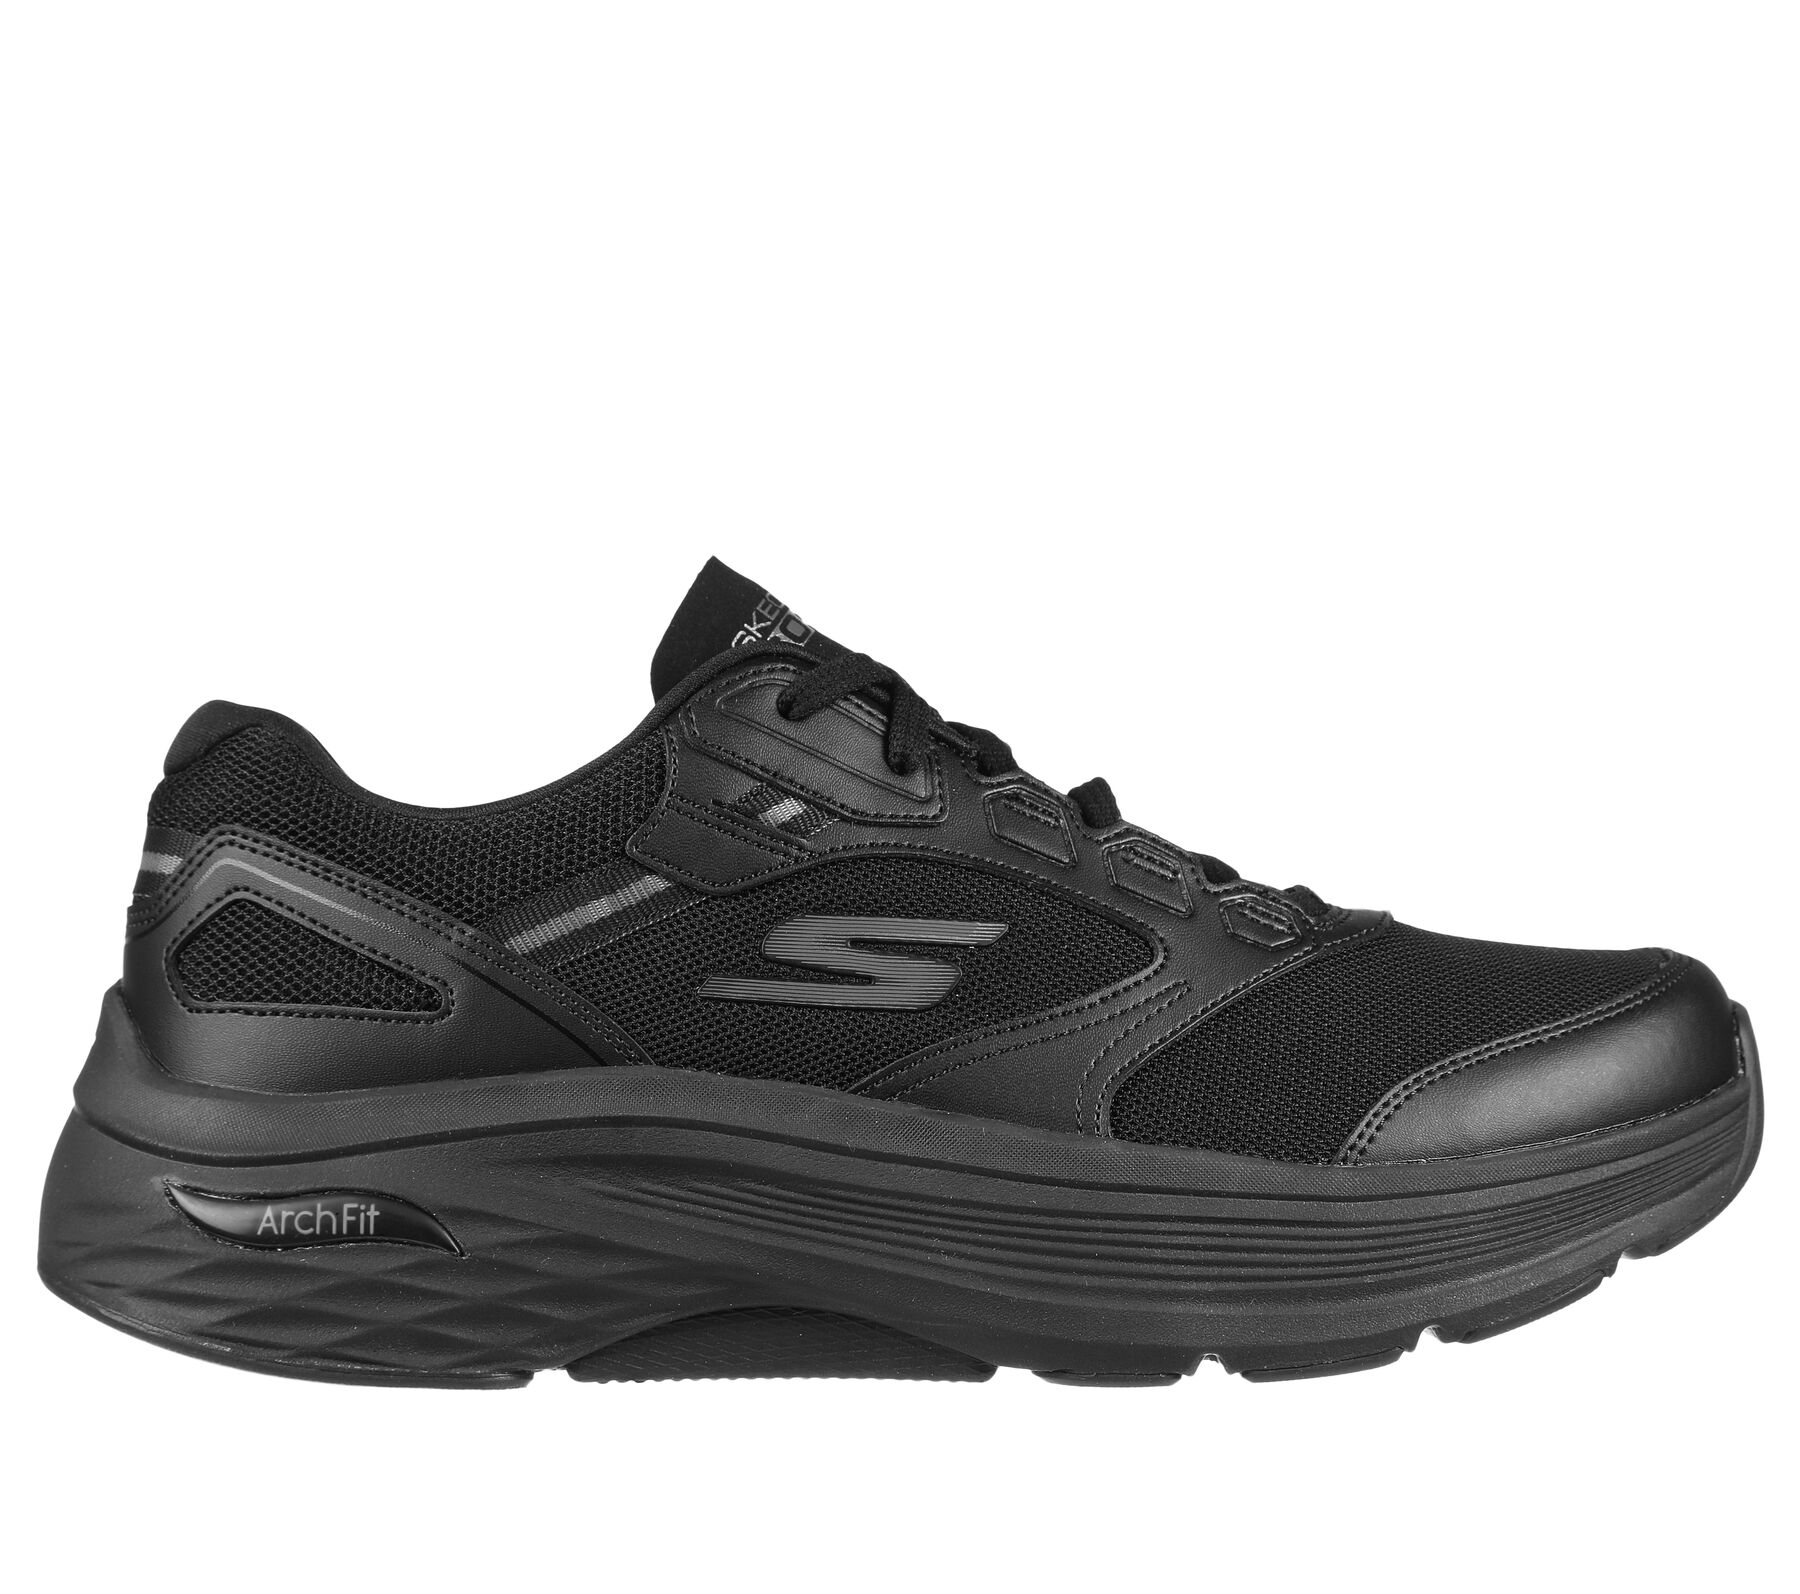 Shop the Skechers Max Cushioning Arch Fit - Rugged Man | SKECHERS